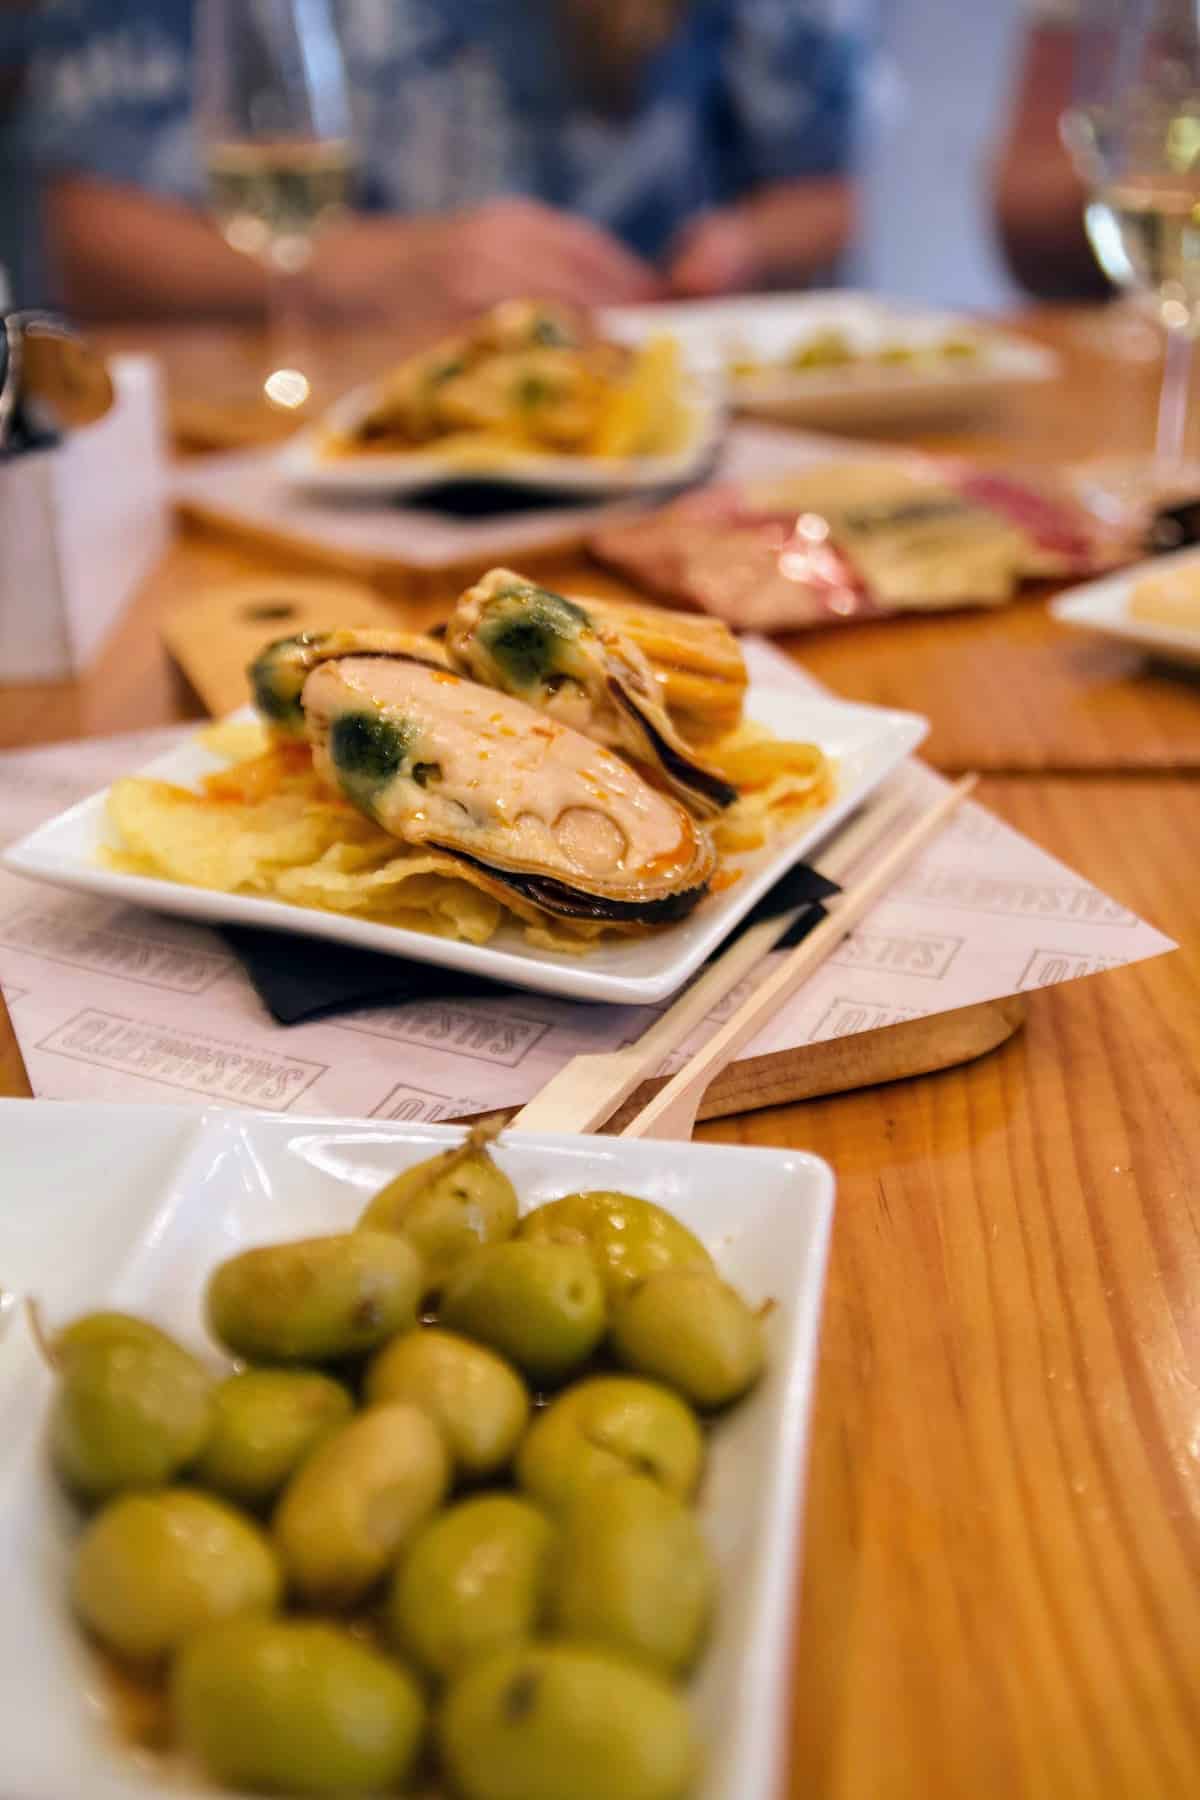 Mussels served over potato chips next to a dish of green olives